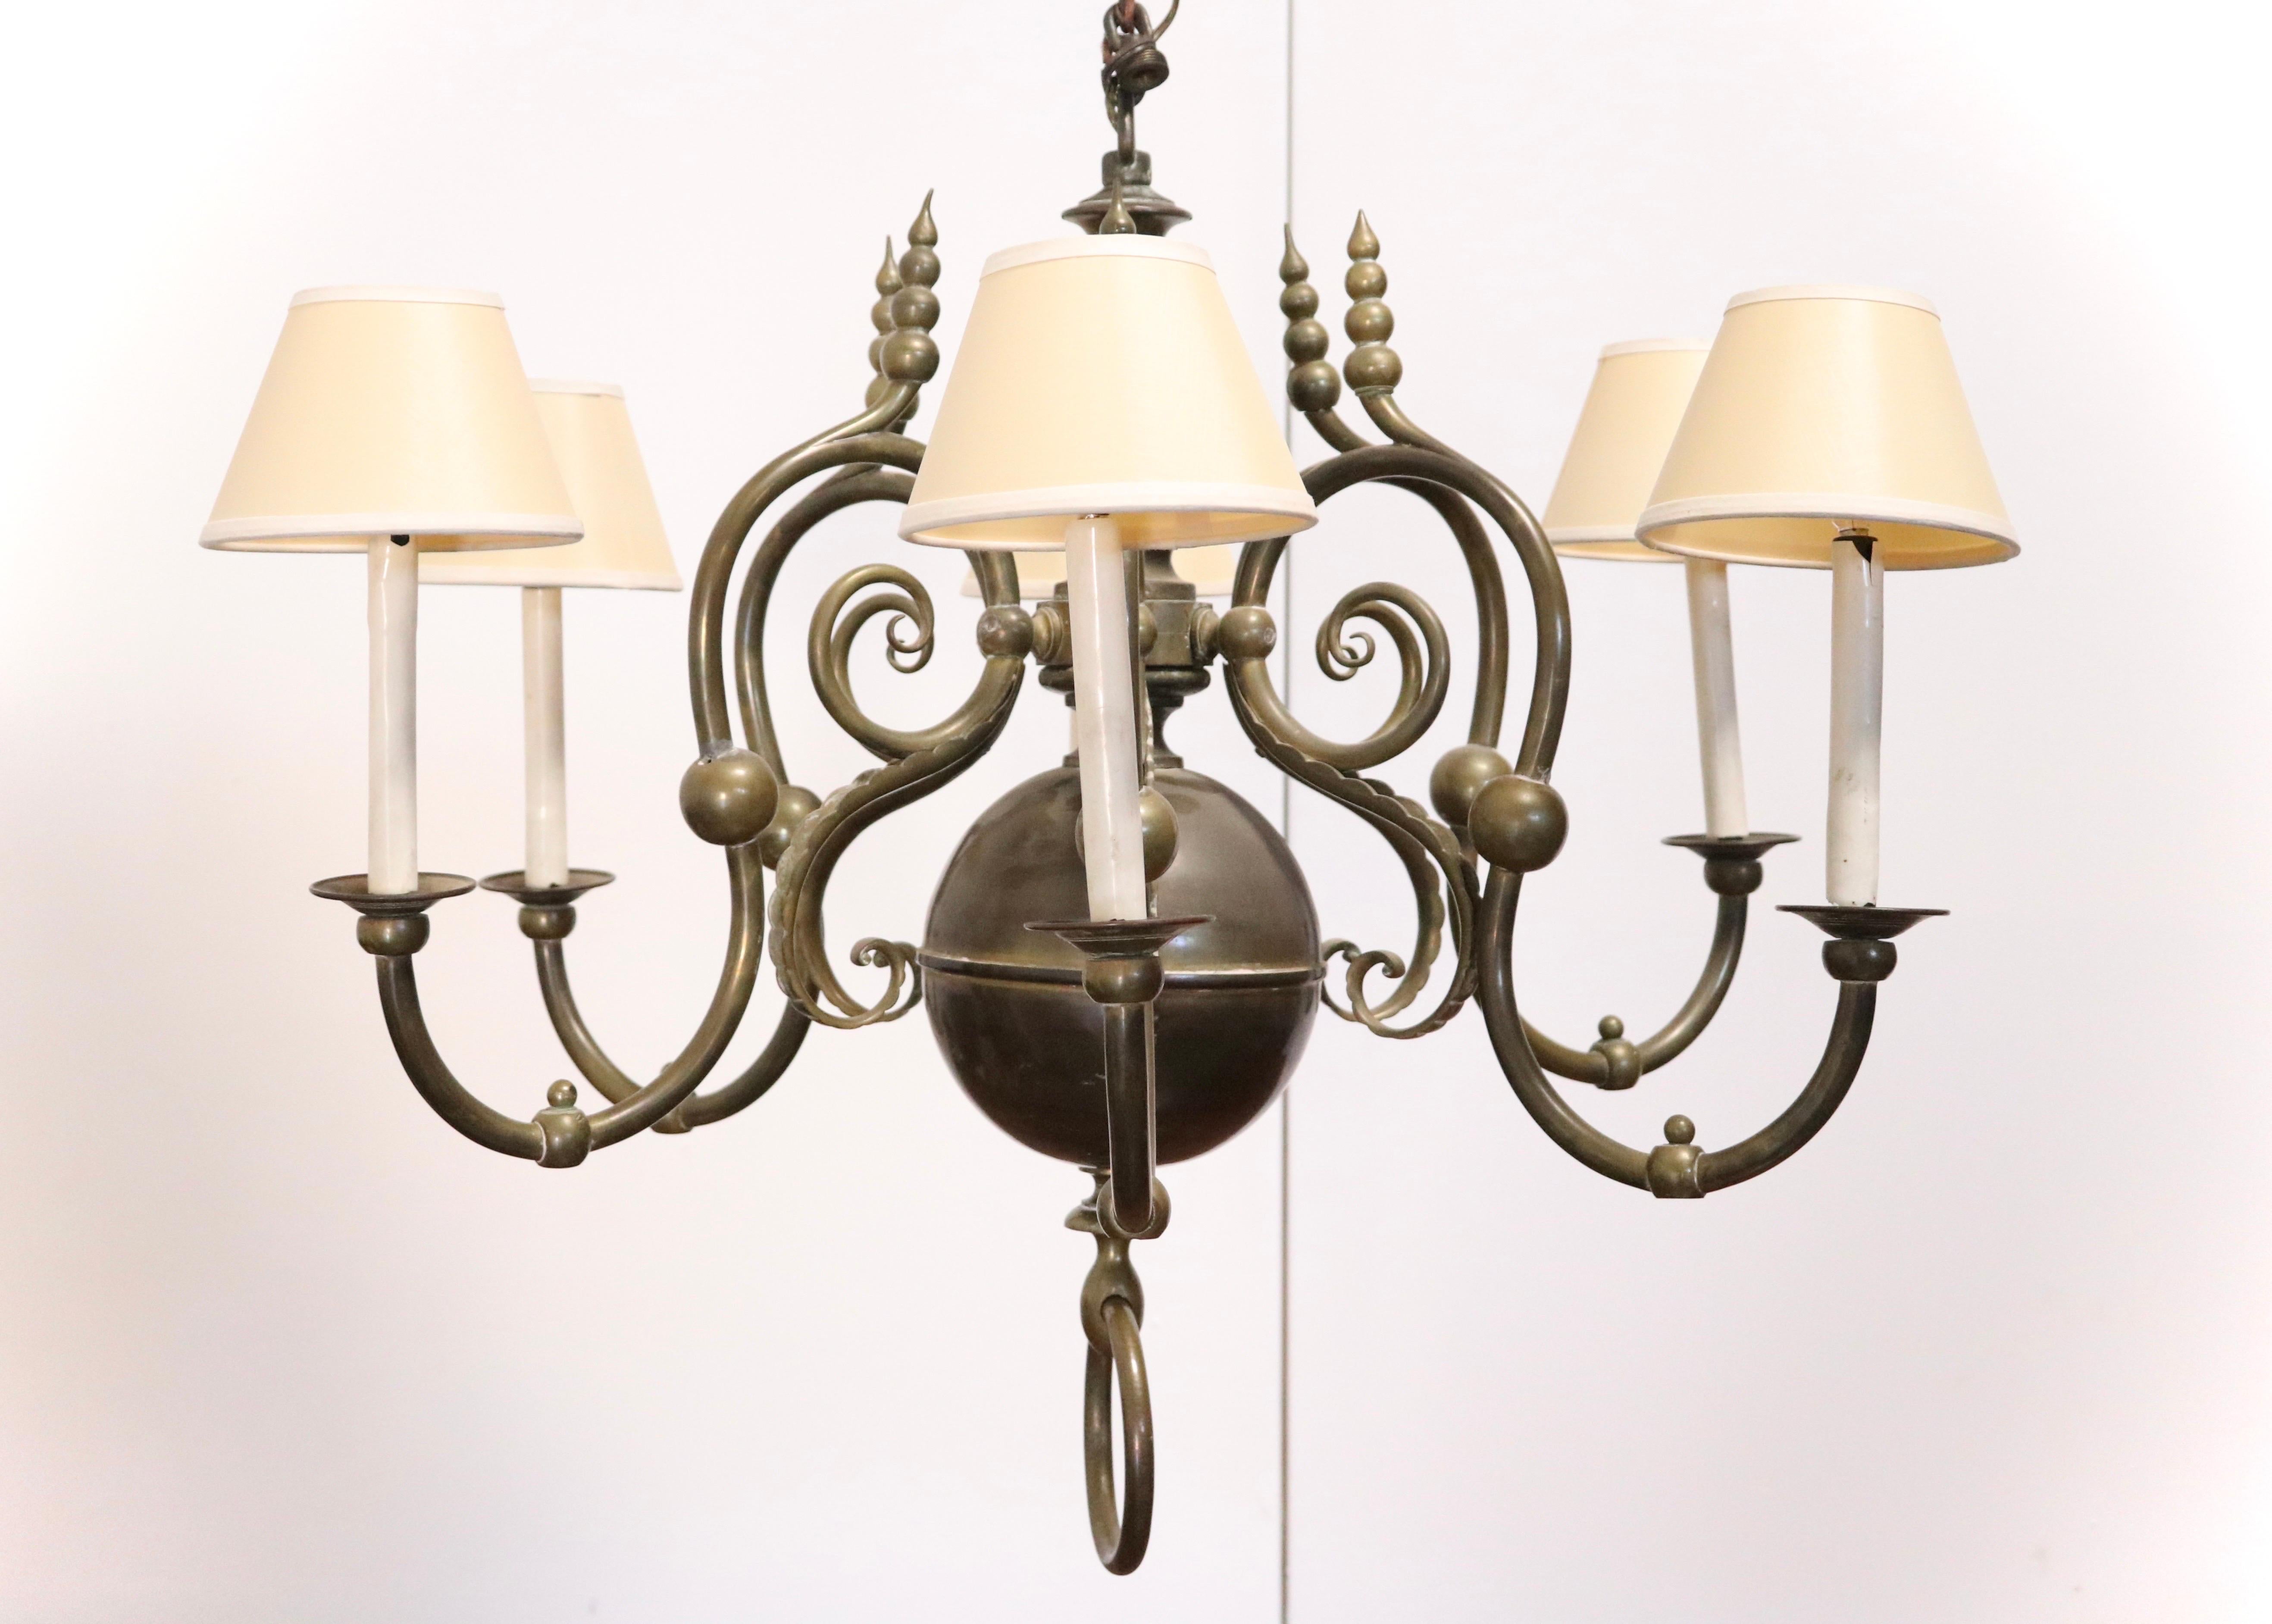 A monumental European bronze chandelier (possibly French) with 6 electrified scroll arms supporting candleholders capped with paper shades. 

Features Classic period design elements including a double globe post with each arm culminating in a thick